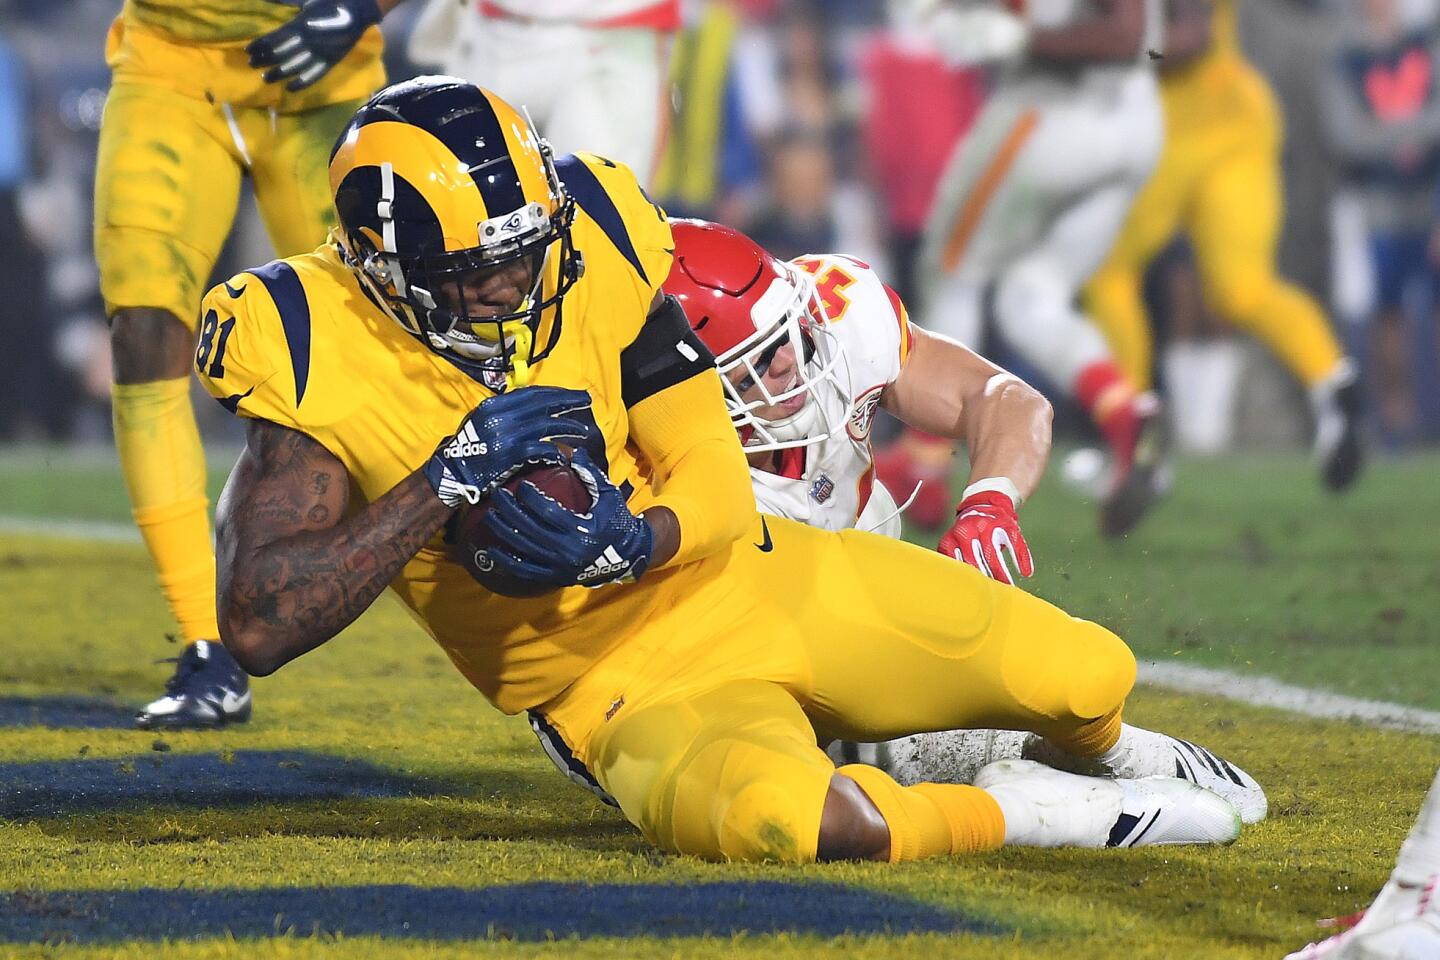 Rams outduel Chiefs 54-51 in offensive extravaganza, Raiders/NFL